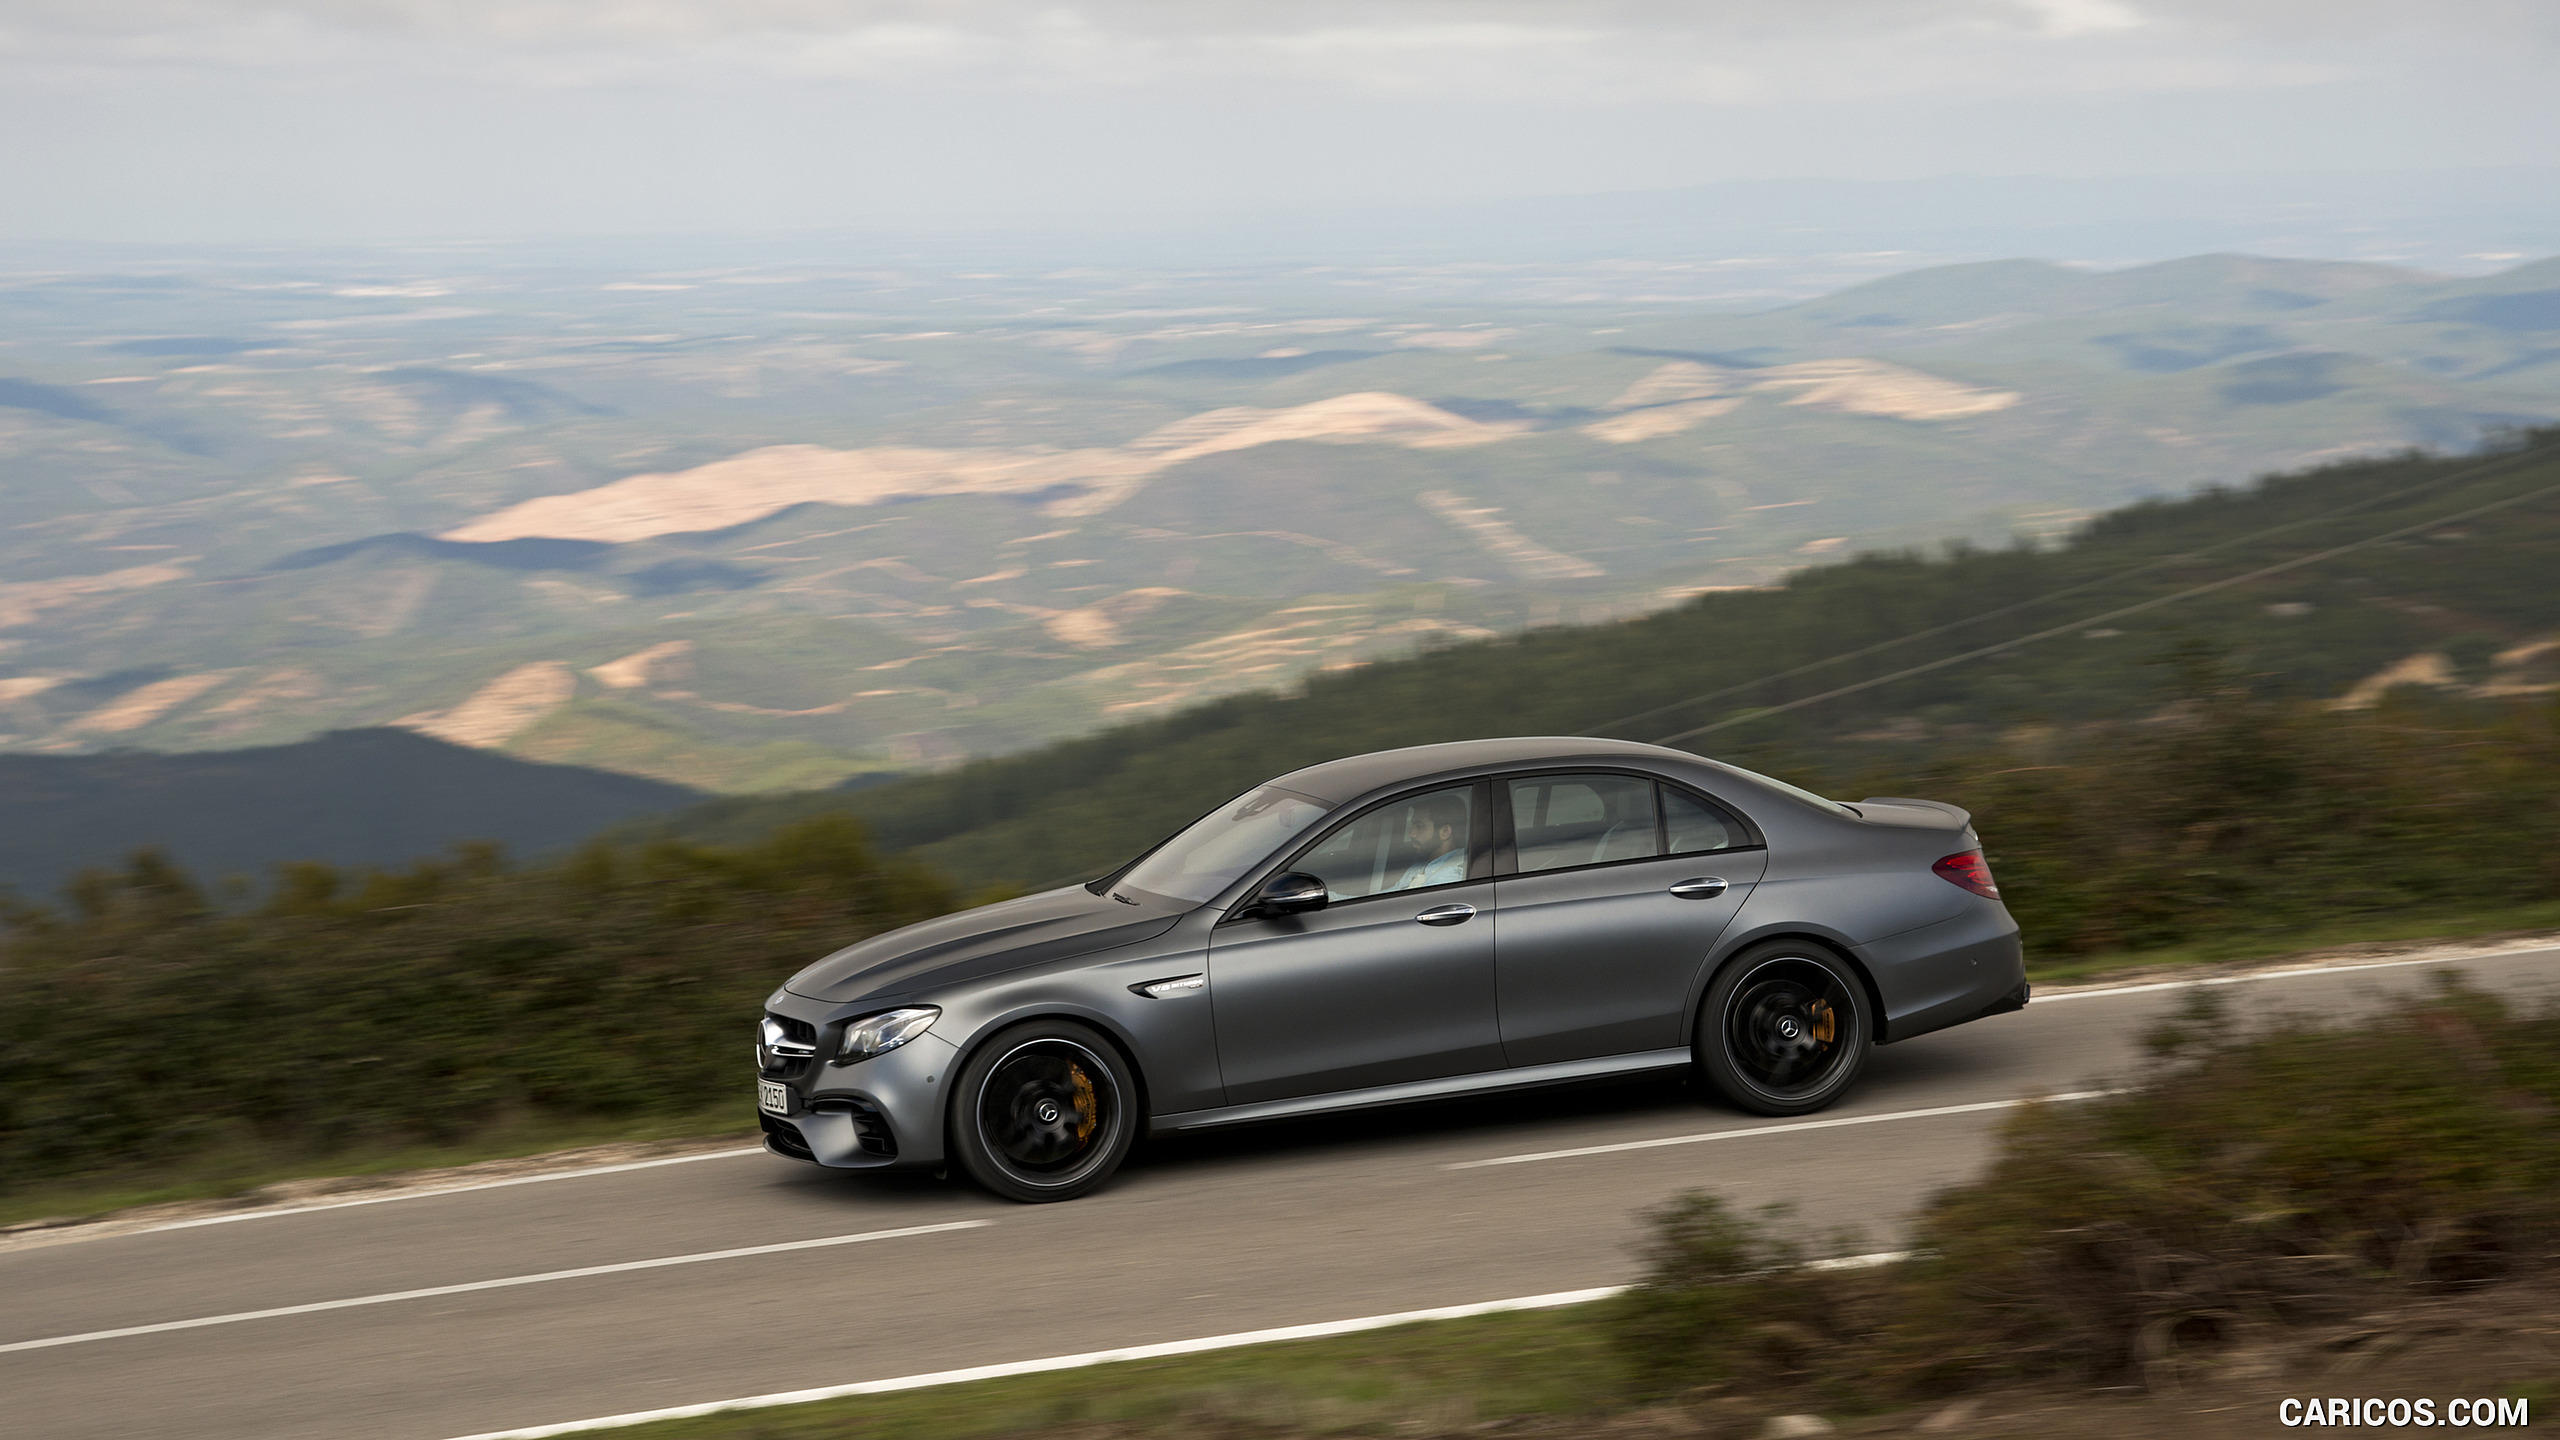 2018 Mercedes-AMG E63 S 4MATIC+ - Side, #296 of 323